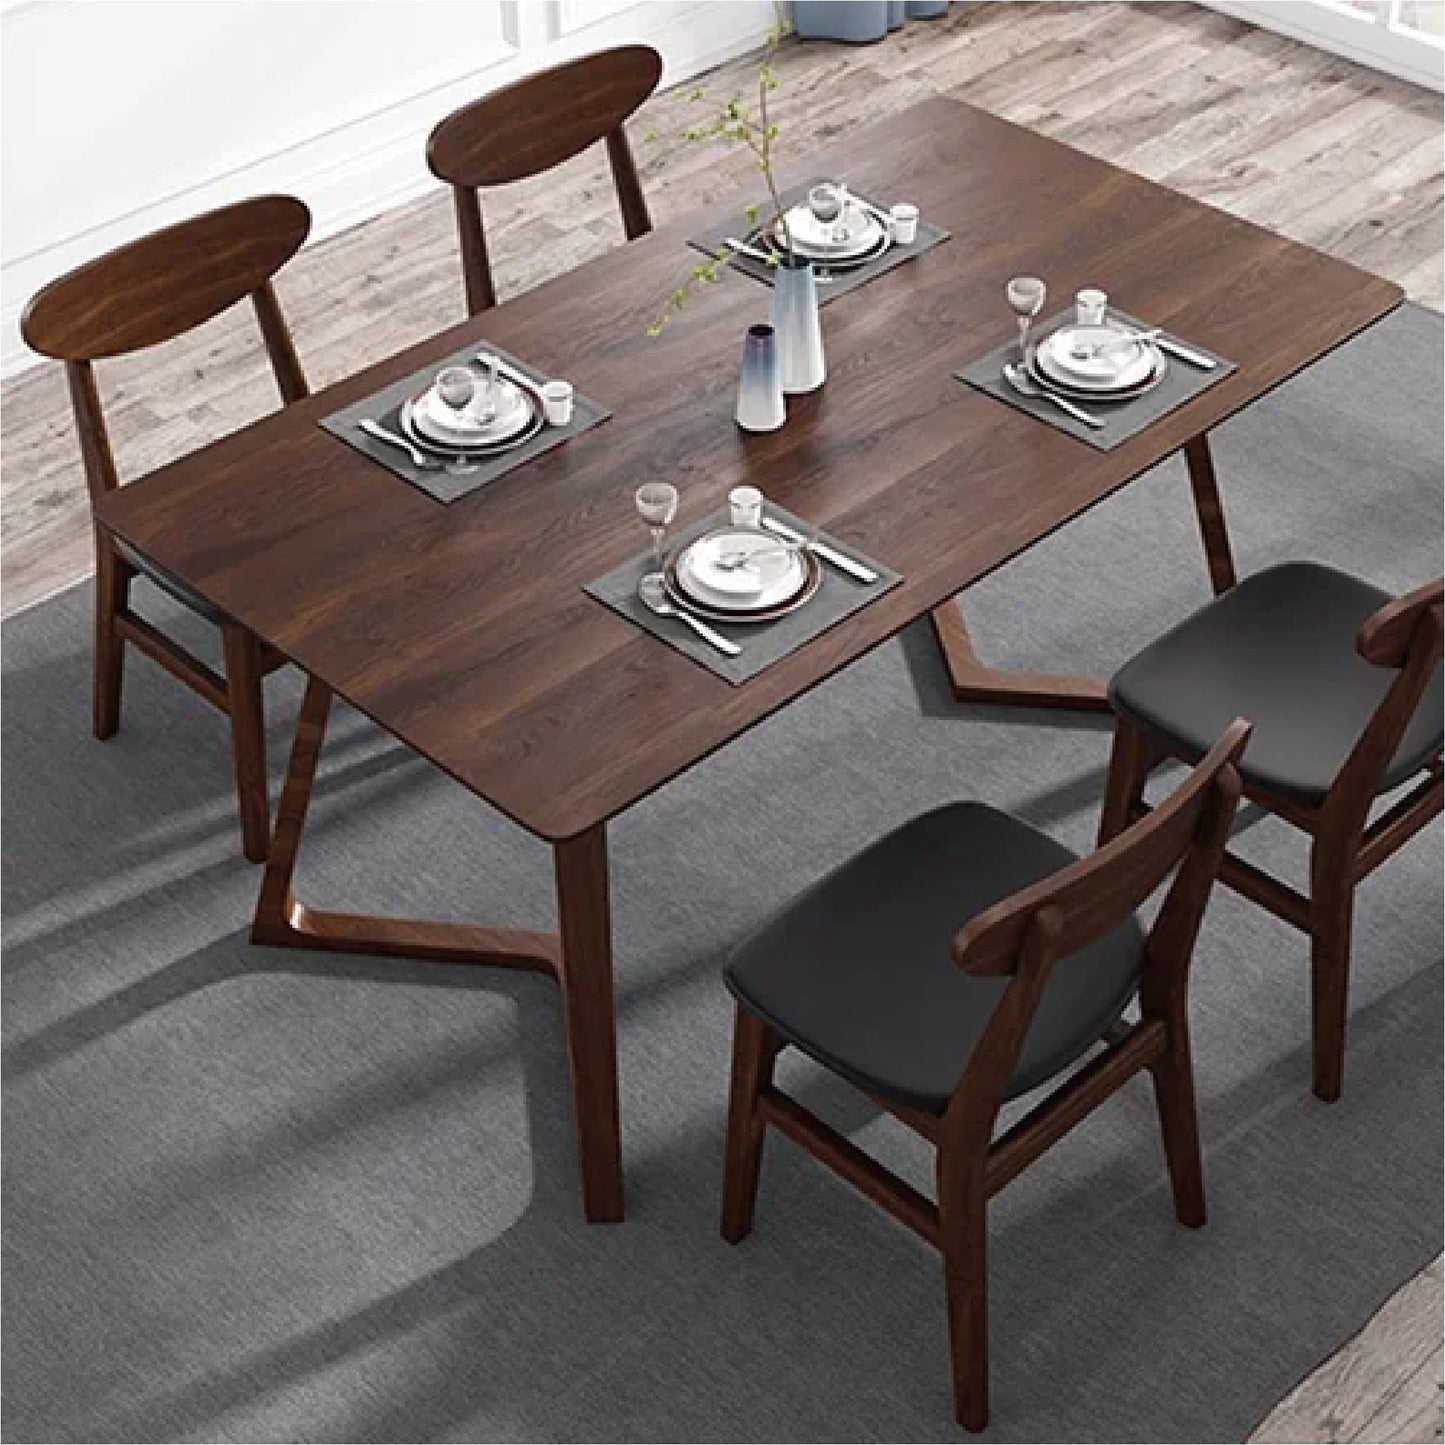 (Self-collect Clearance Price) Chopin Solid Wood Dining Chair- Spot